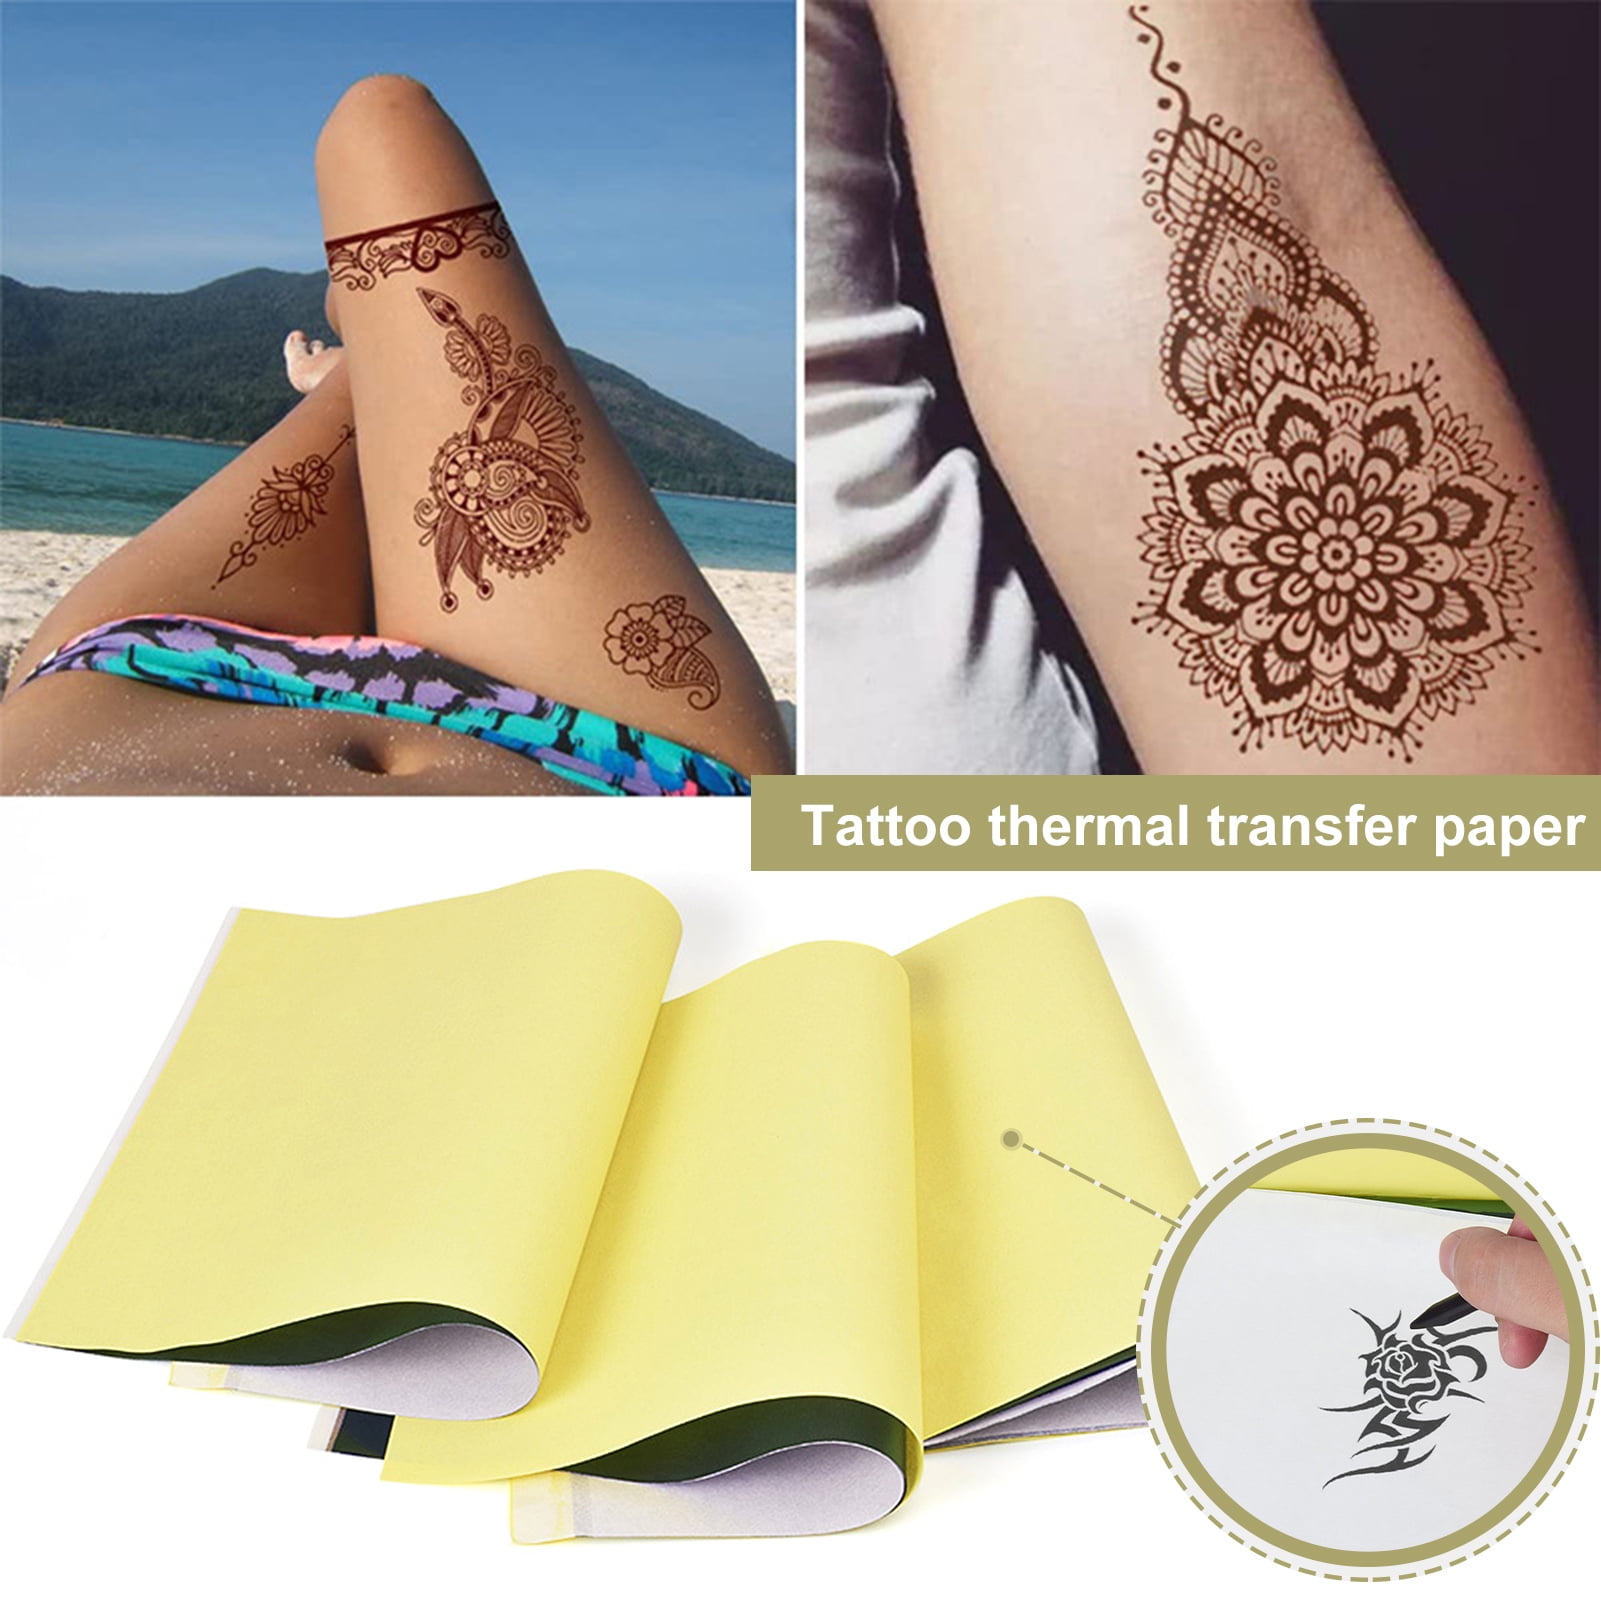 Tattoo Transfer Paper - 100 PCS Transfer Paper for Tattooing, 4 Layers A4  Size Tattoo Stencil Paper, Temporary Tattoo Paper for Tattoo Transfer Kit, T